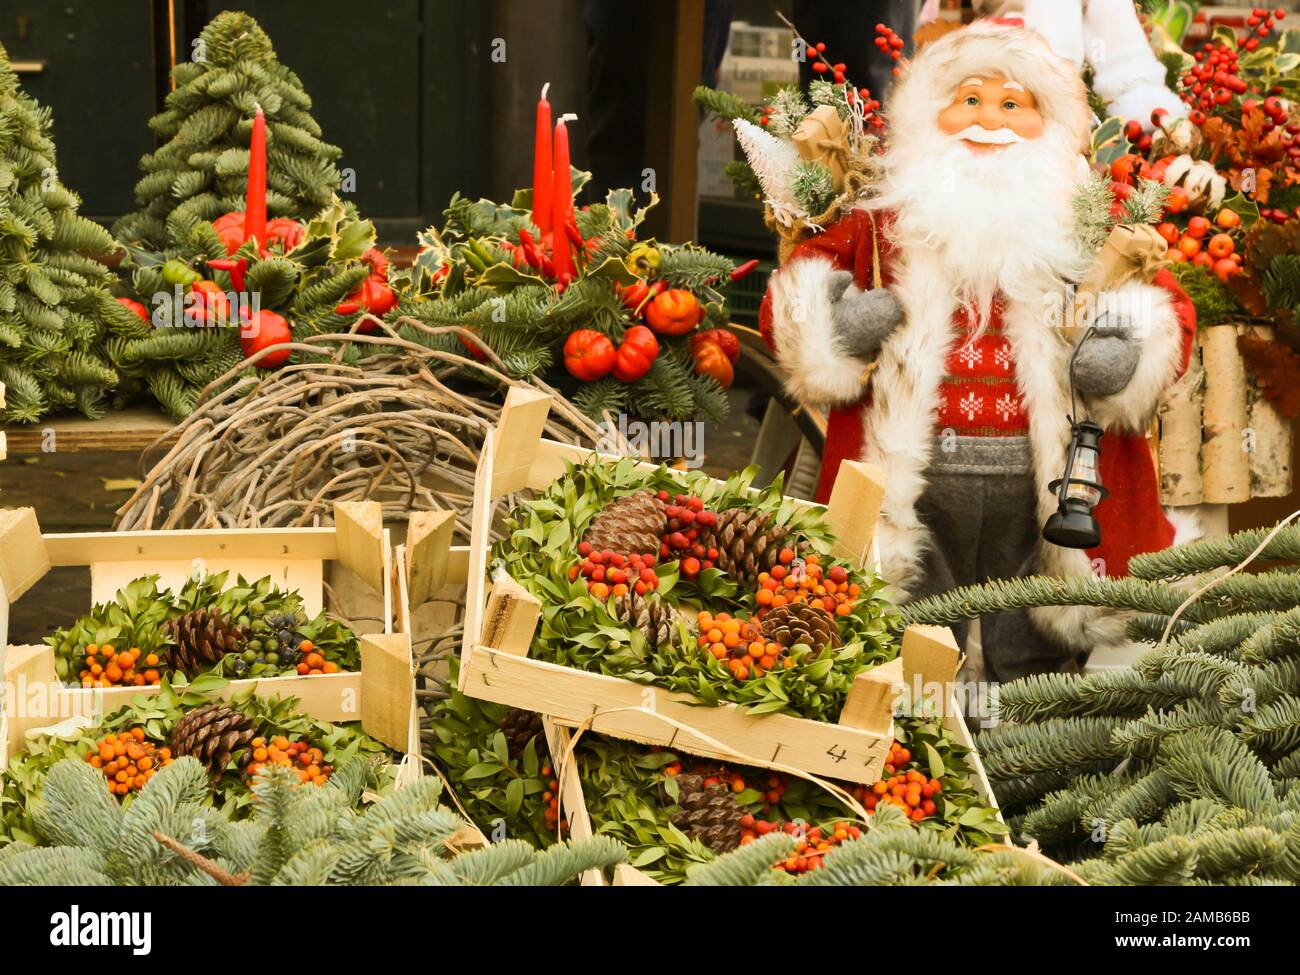 Santa Claus with some Christmas decoration in a pubblic market in Rome, Italy Stock Photo